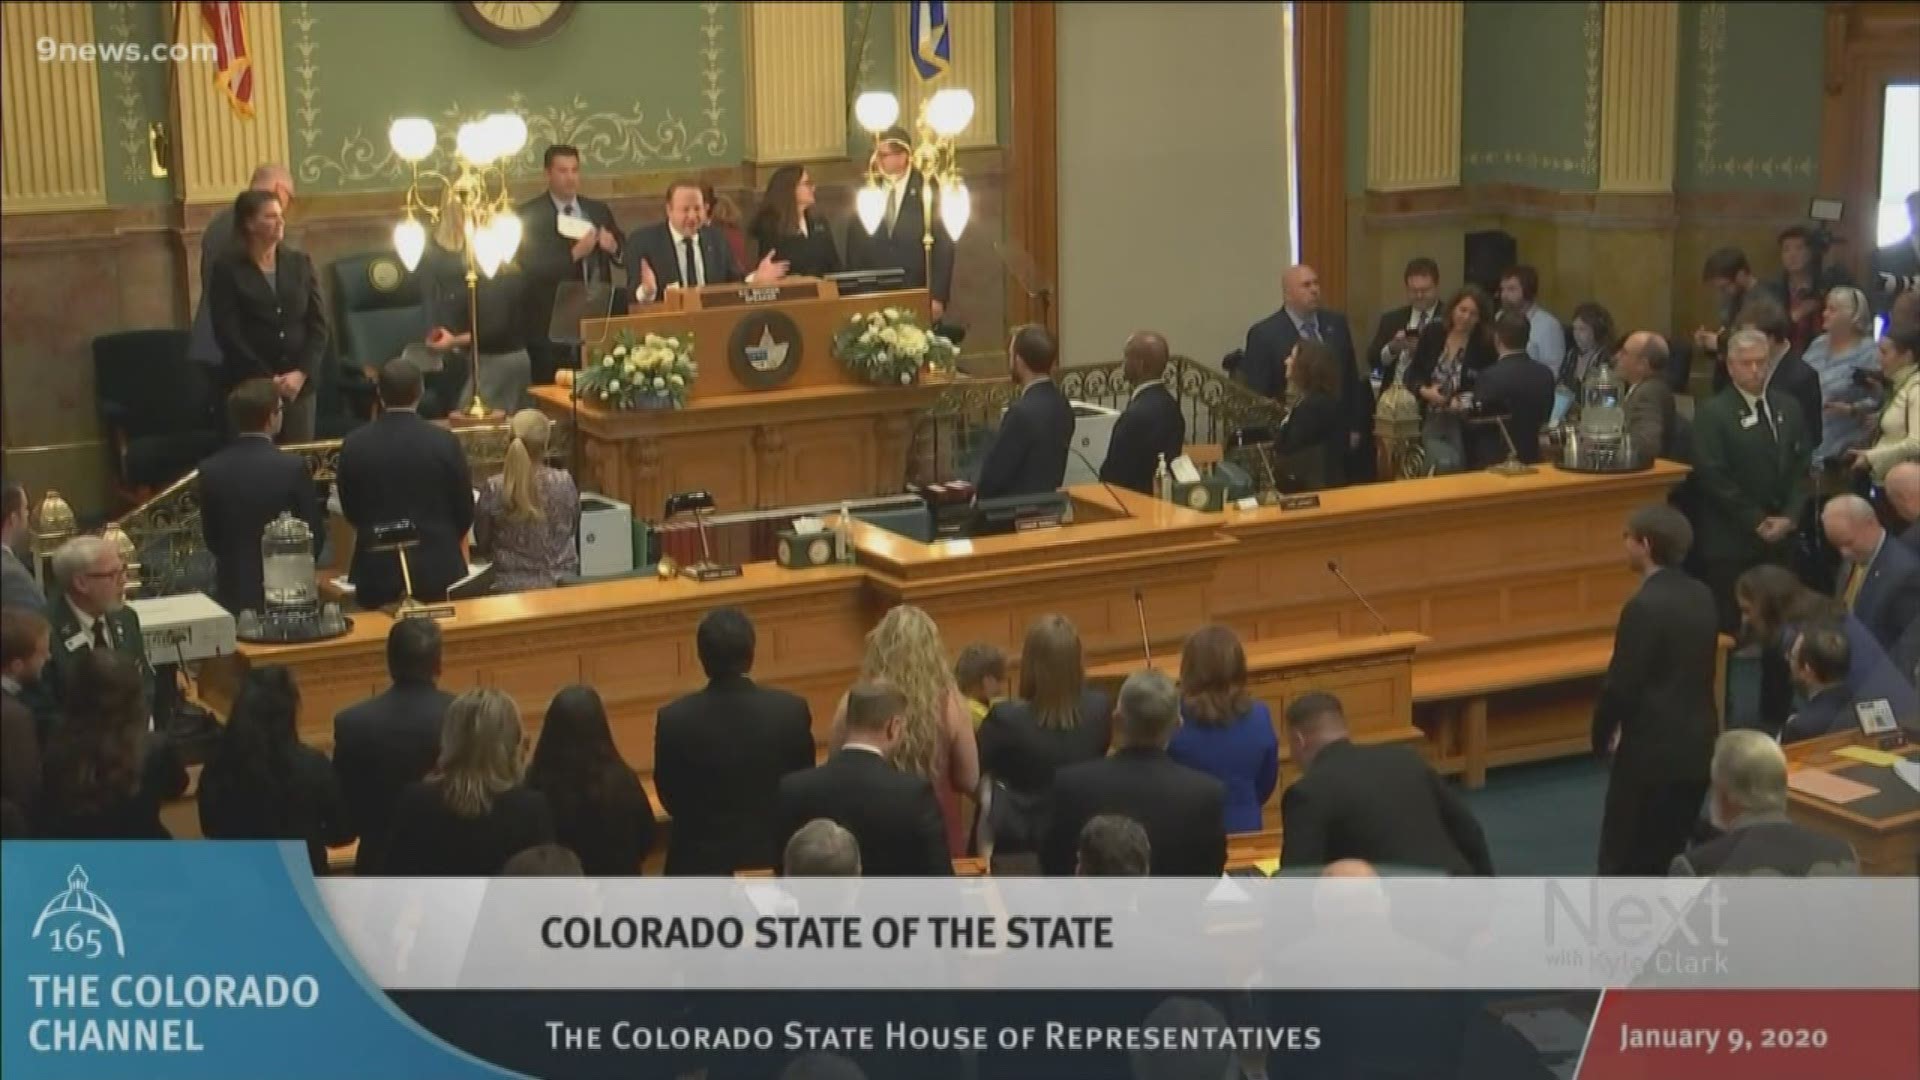 Oil and gas protesters delayed Colorado Gov. Jared Polis' State of the State. When it started, Polis made promises on roads, pre-school and more.